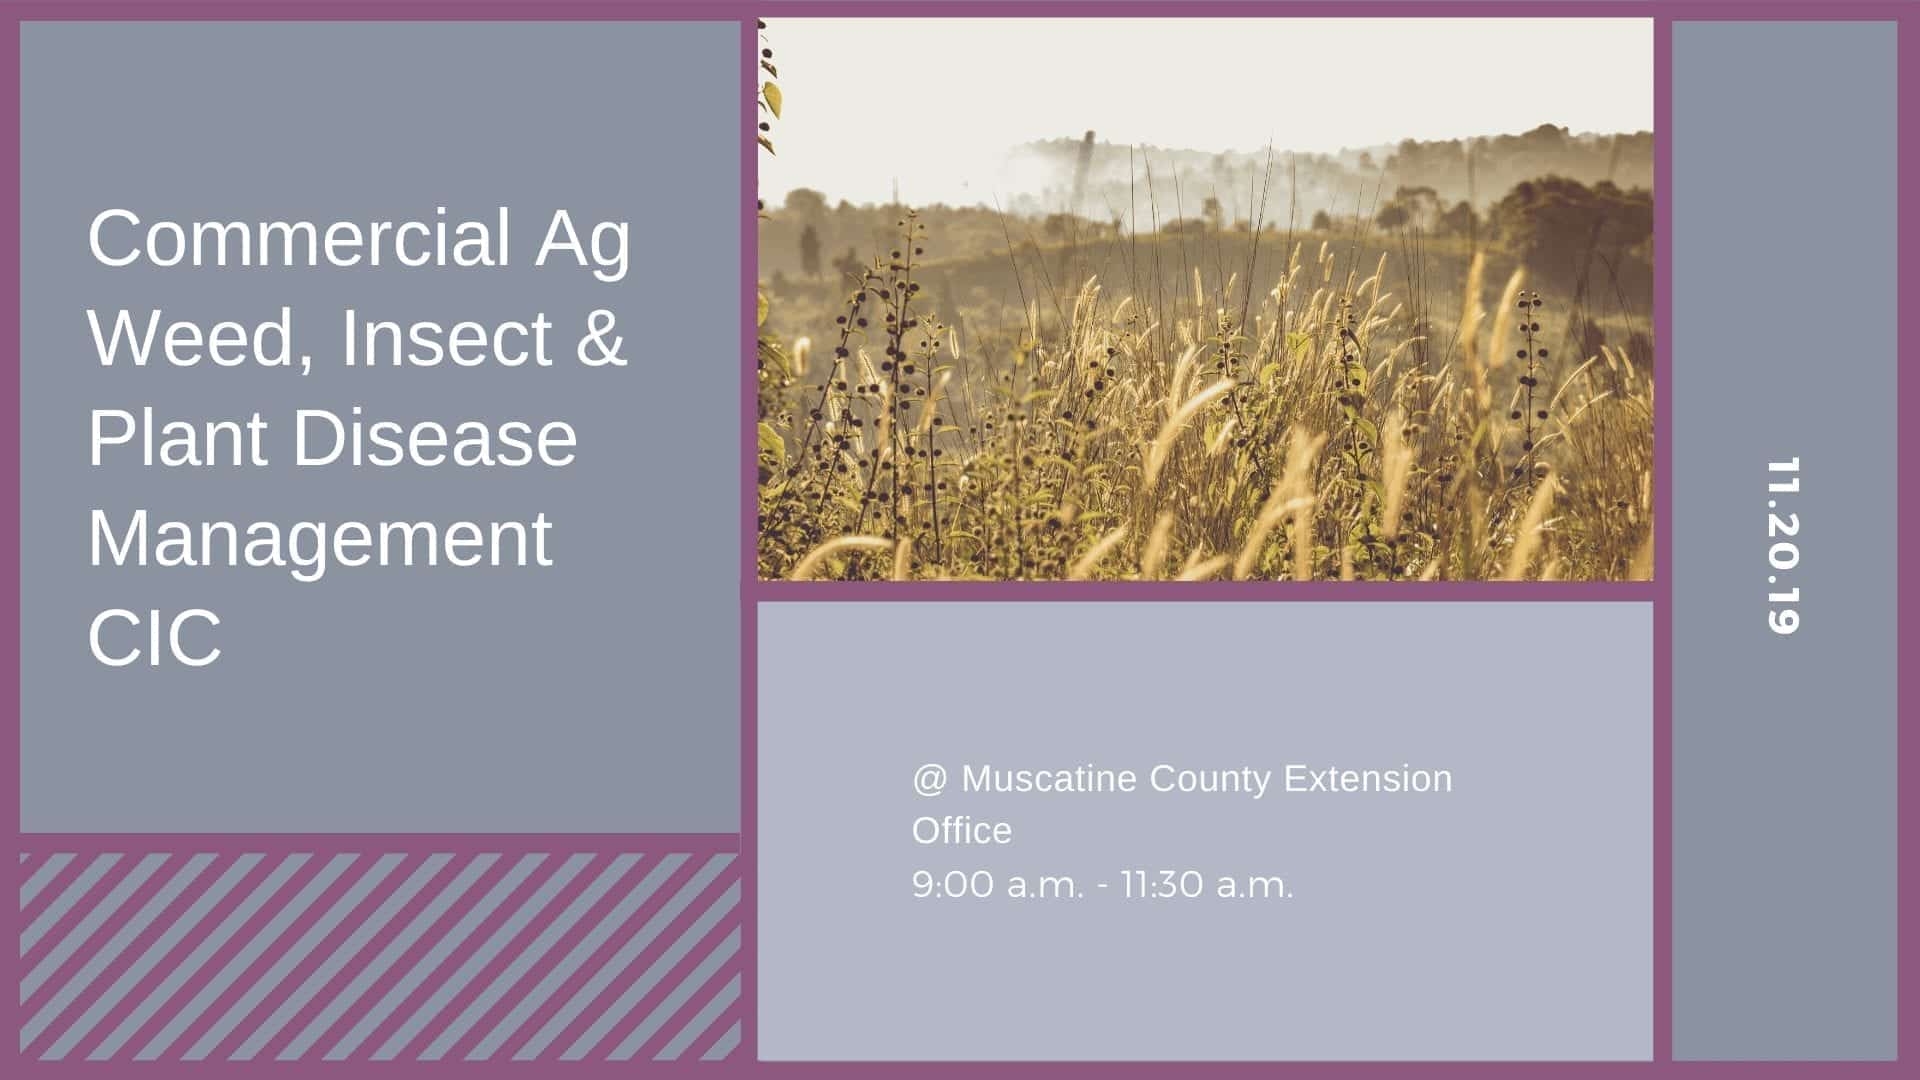 Commercial Ag Weed, Insect & Plant Disease Management CIC